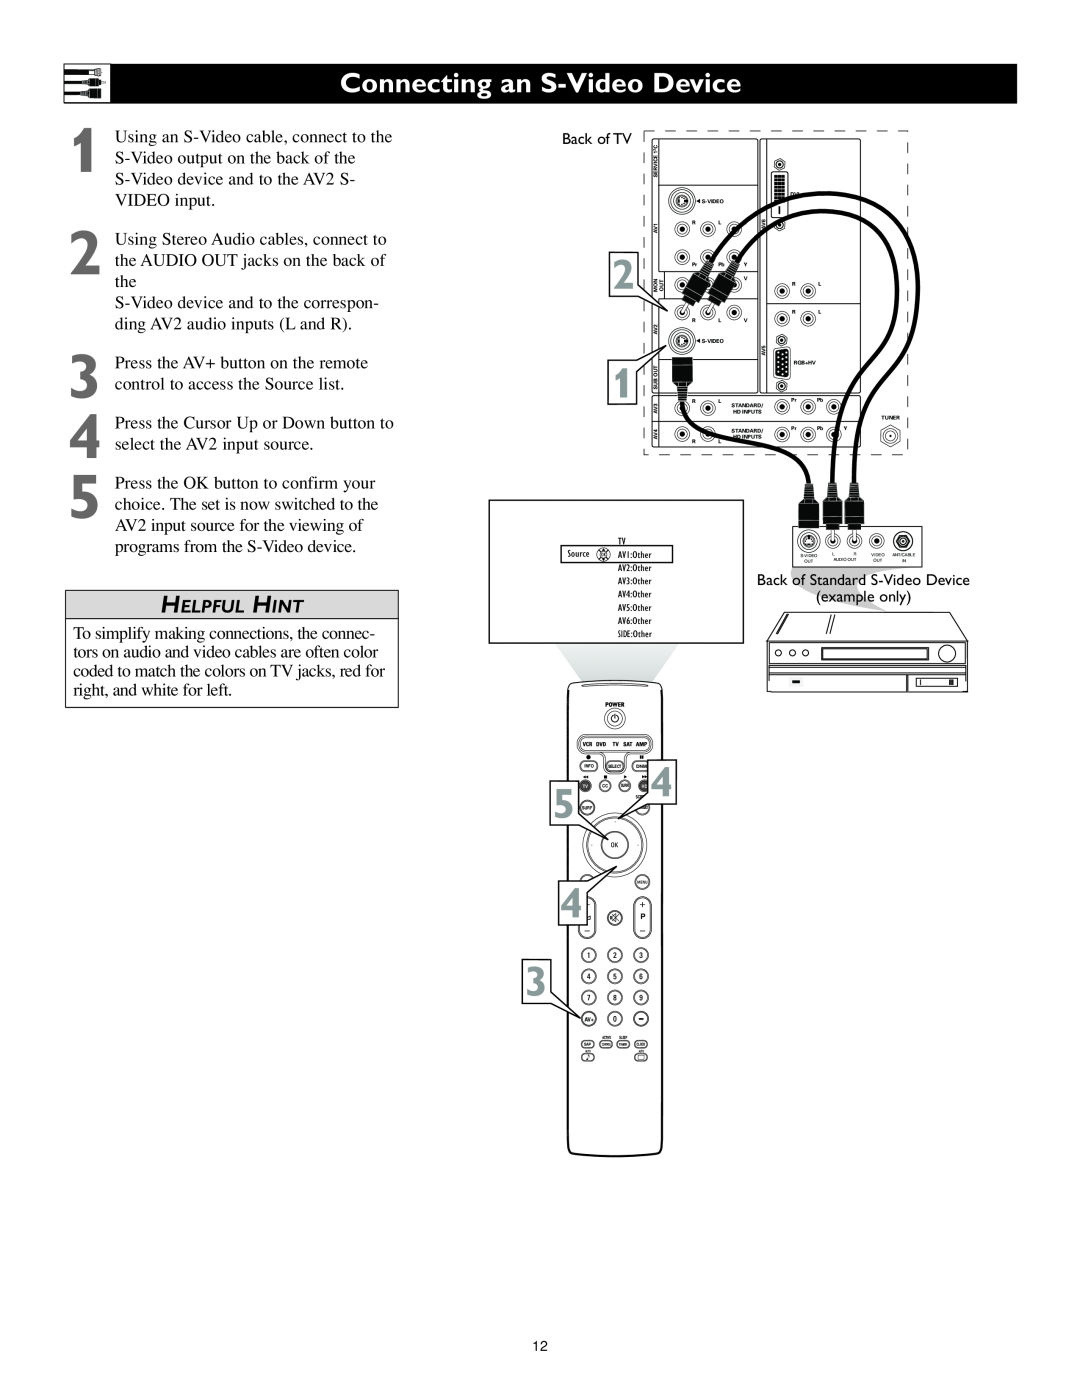 Philips 62PL9524, 55PL9524 setup guide Connecting an S-Video Device, Helpful Hint 